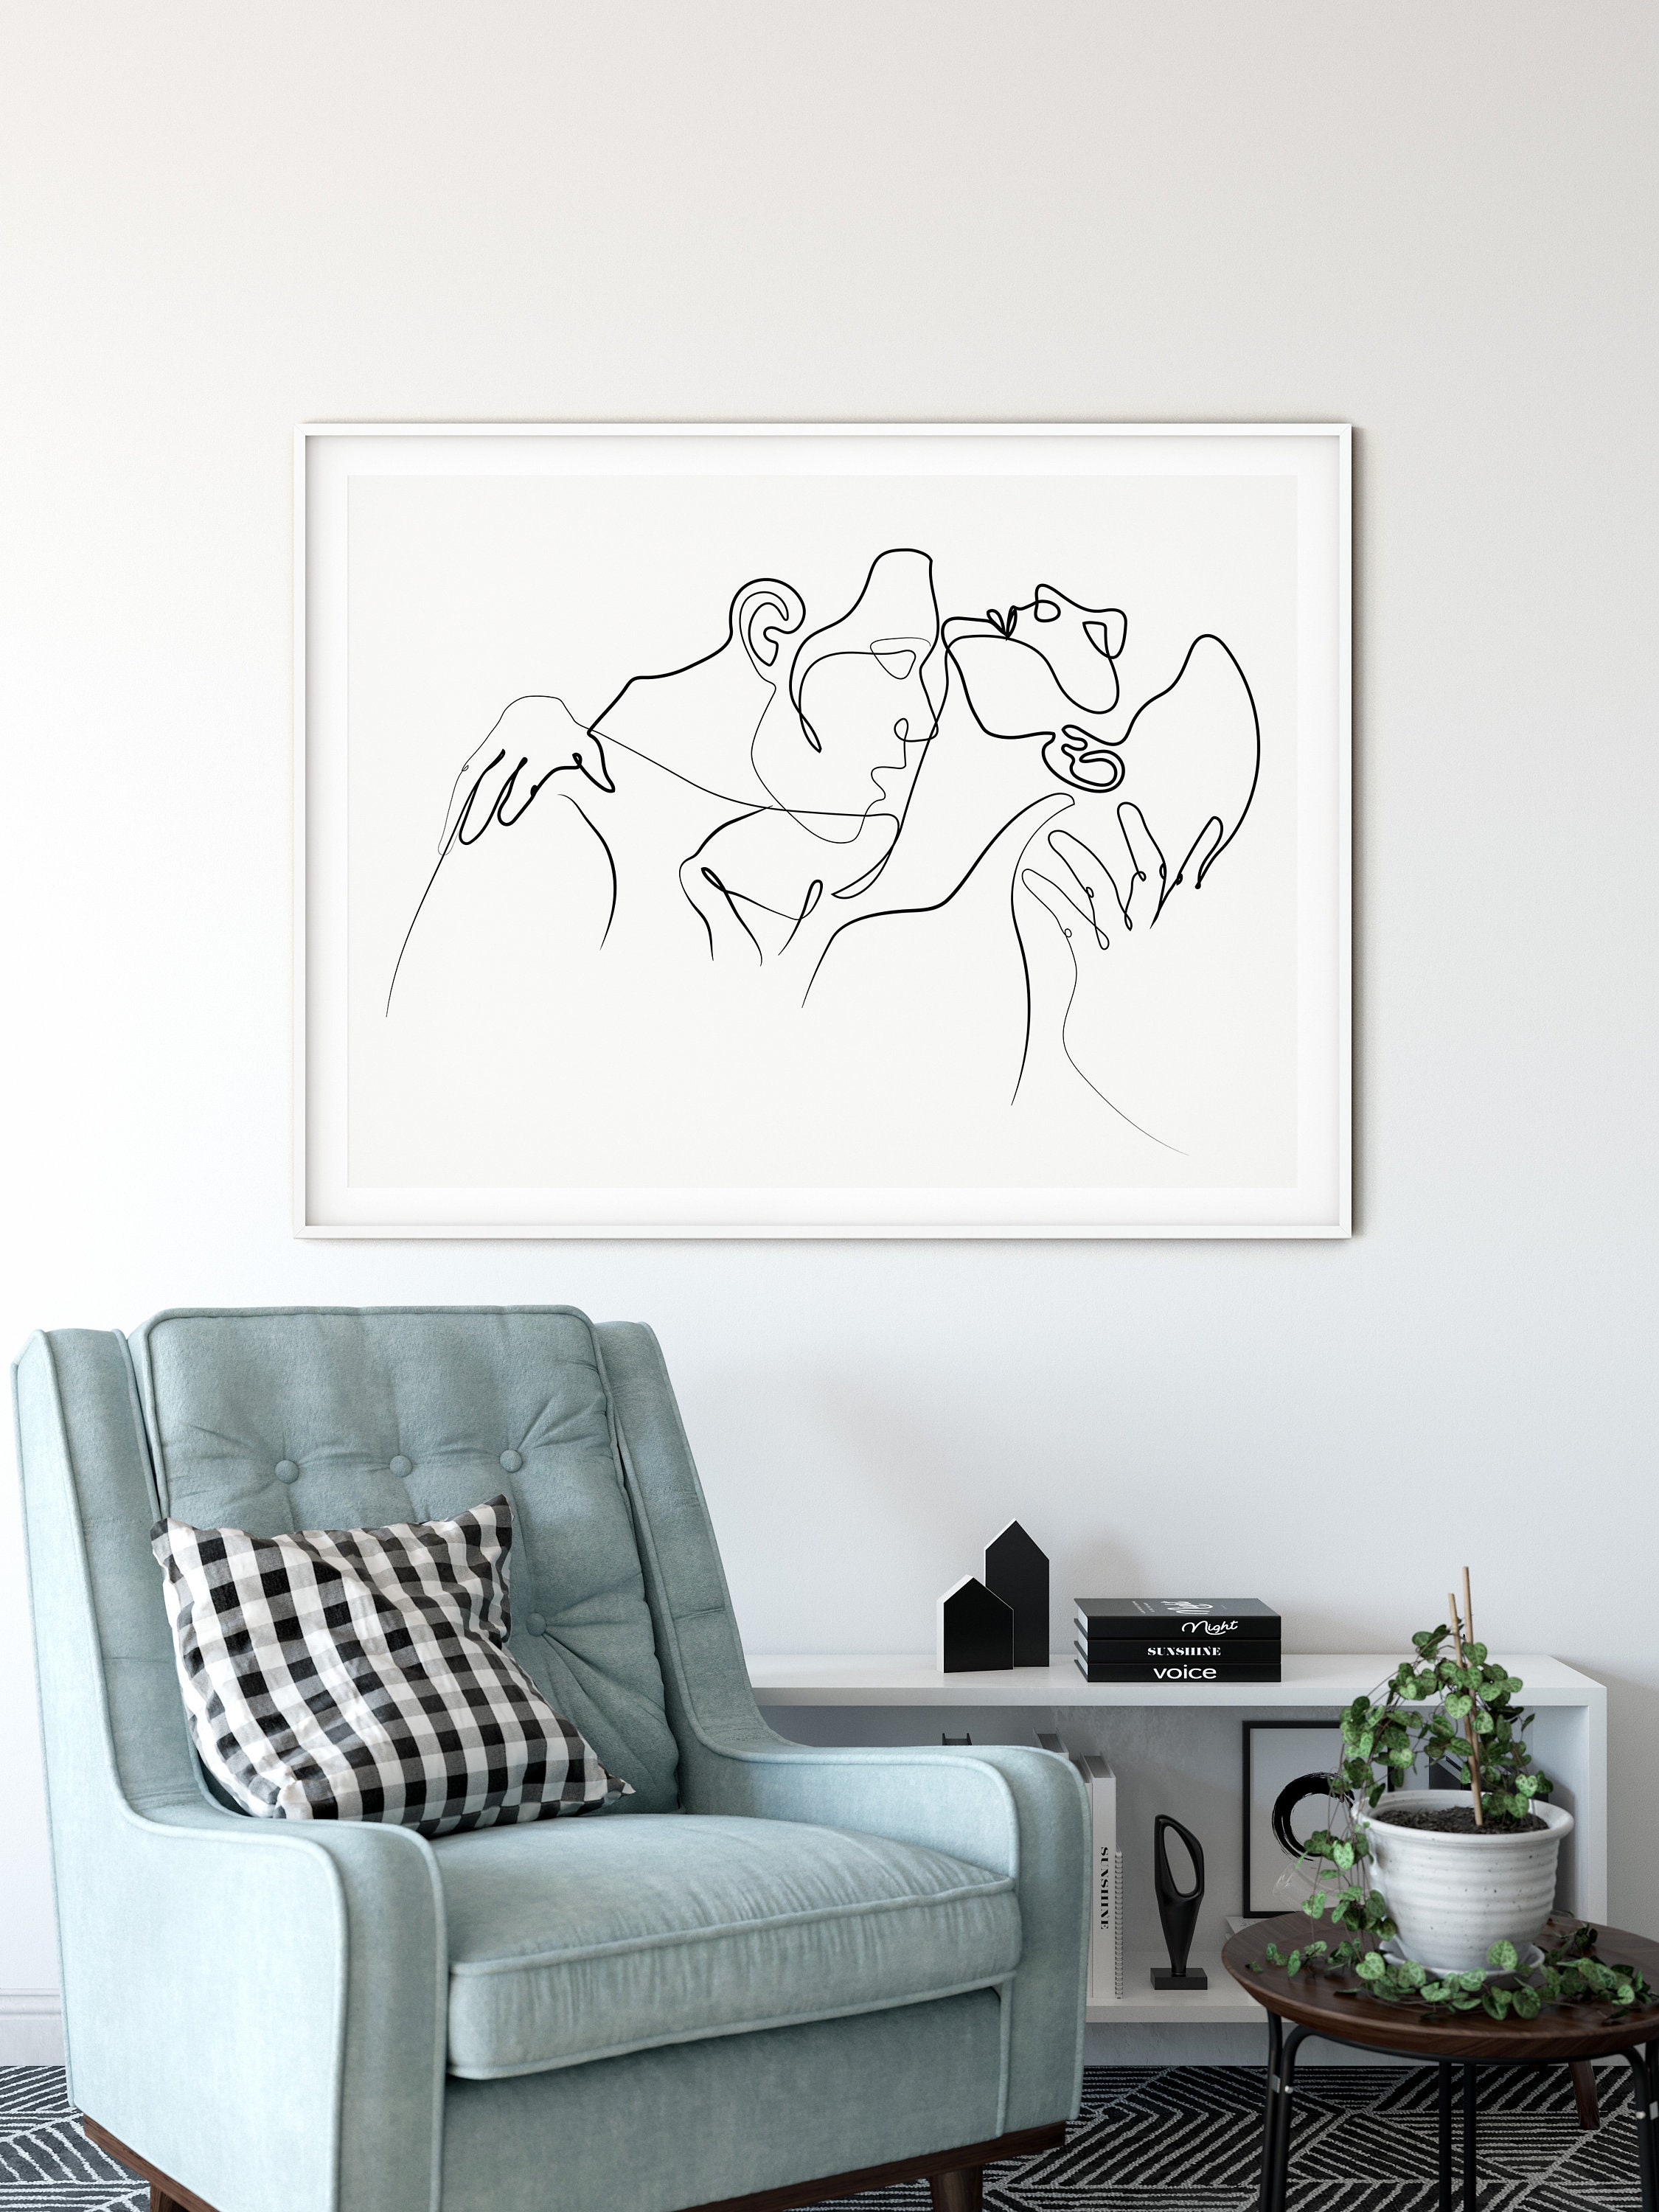 Above Bed Art Kissing Couple Line Drawing | Etsy